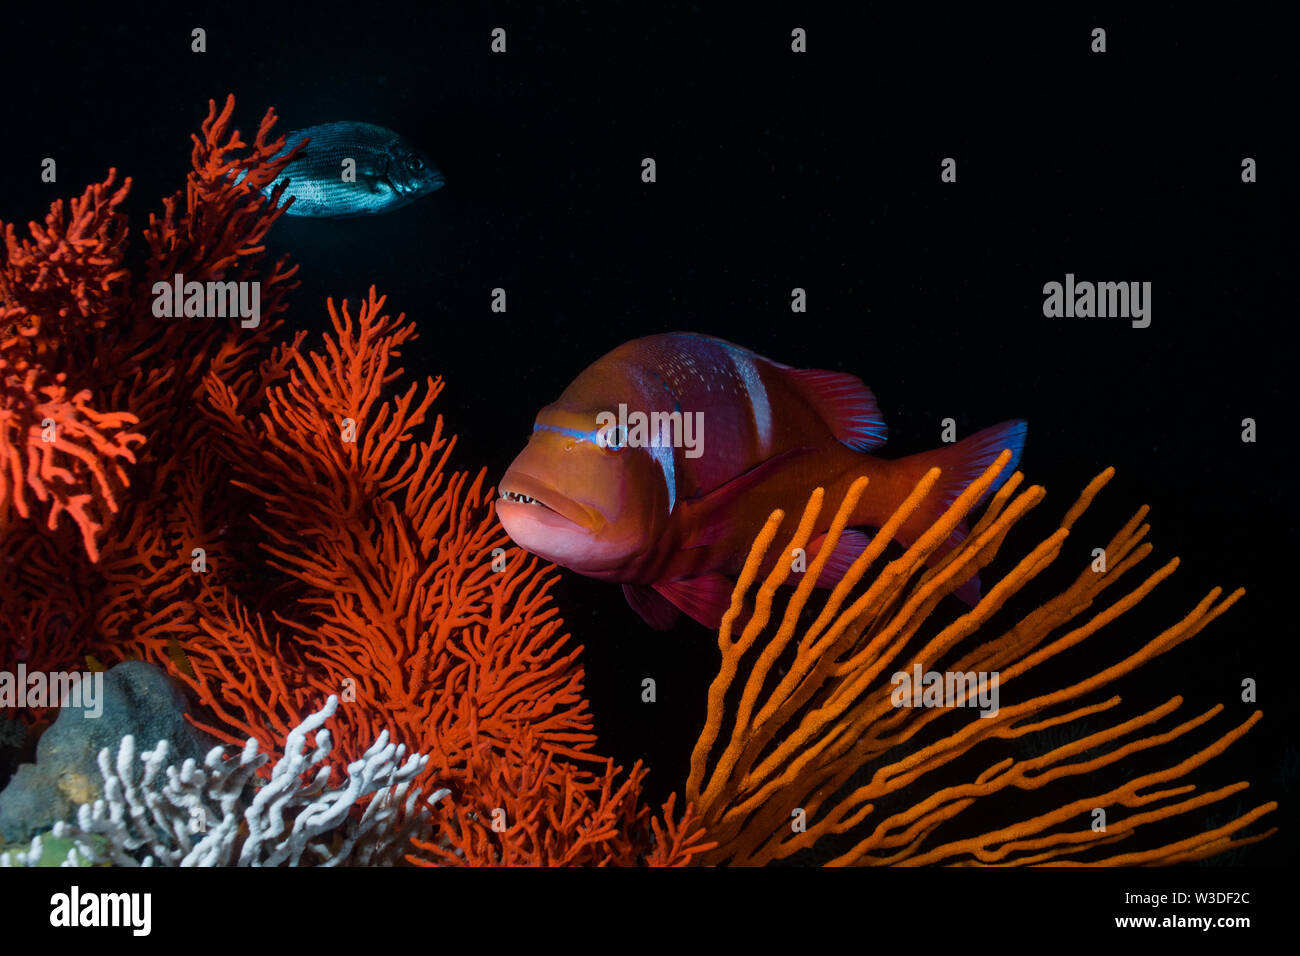 Underwater scene of a Red Roman - Seabream (Chrysoblephus laticeps) fish swimming on the coral reef through orange sea fans. Stock Photo